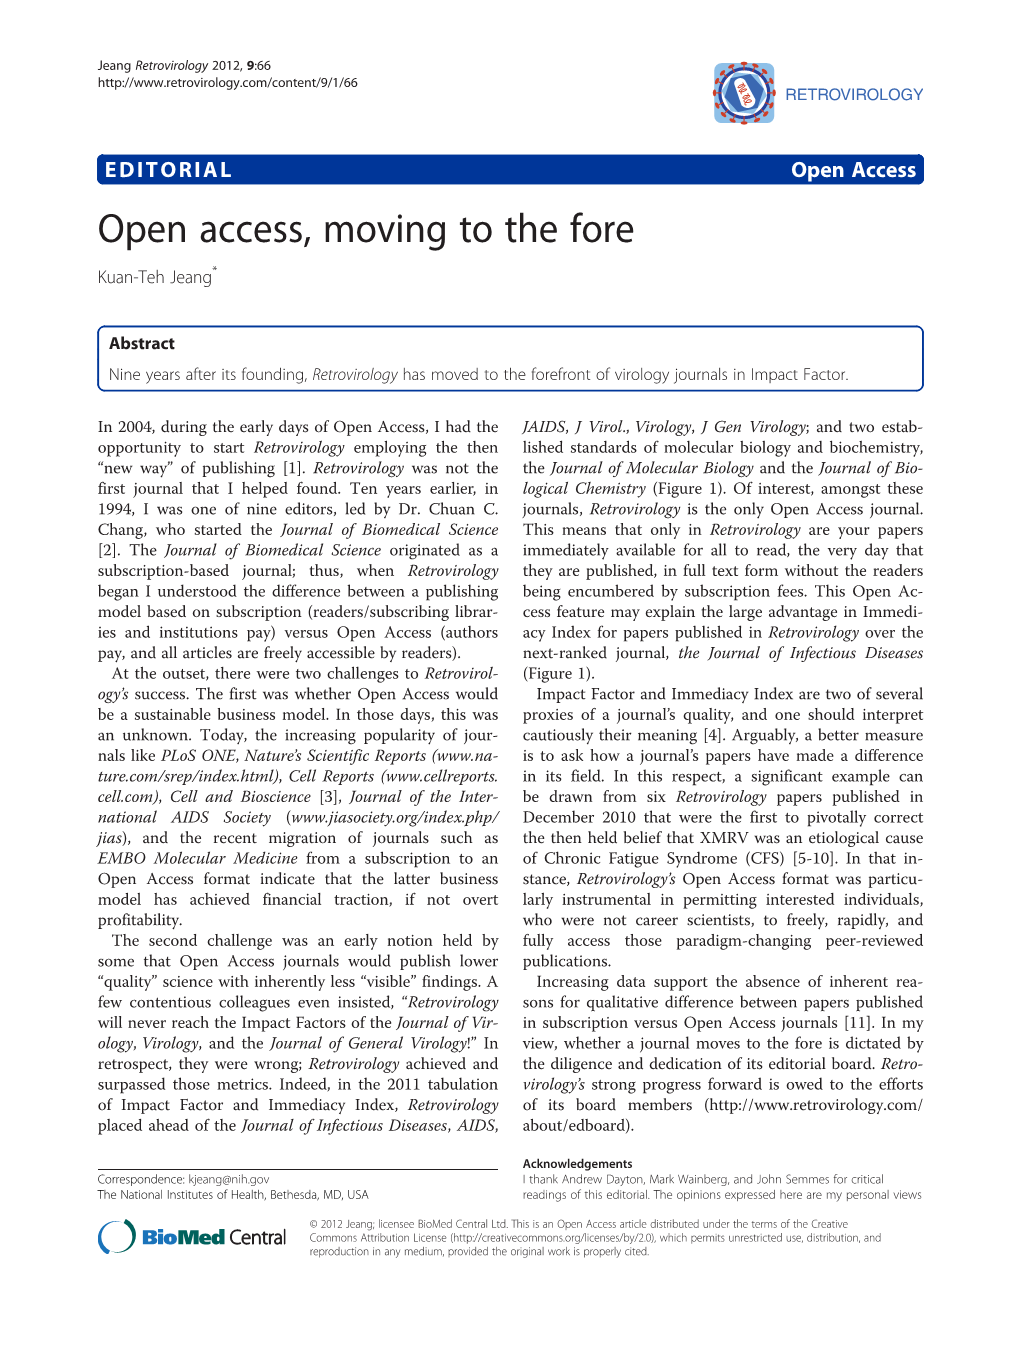 Open Access, Moving to the Fore Kuan-Teh Jeang*